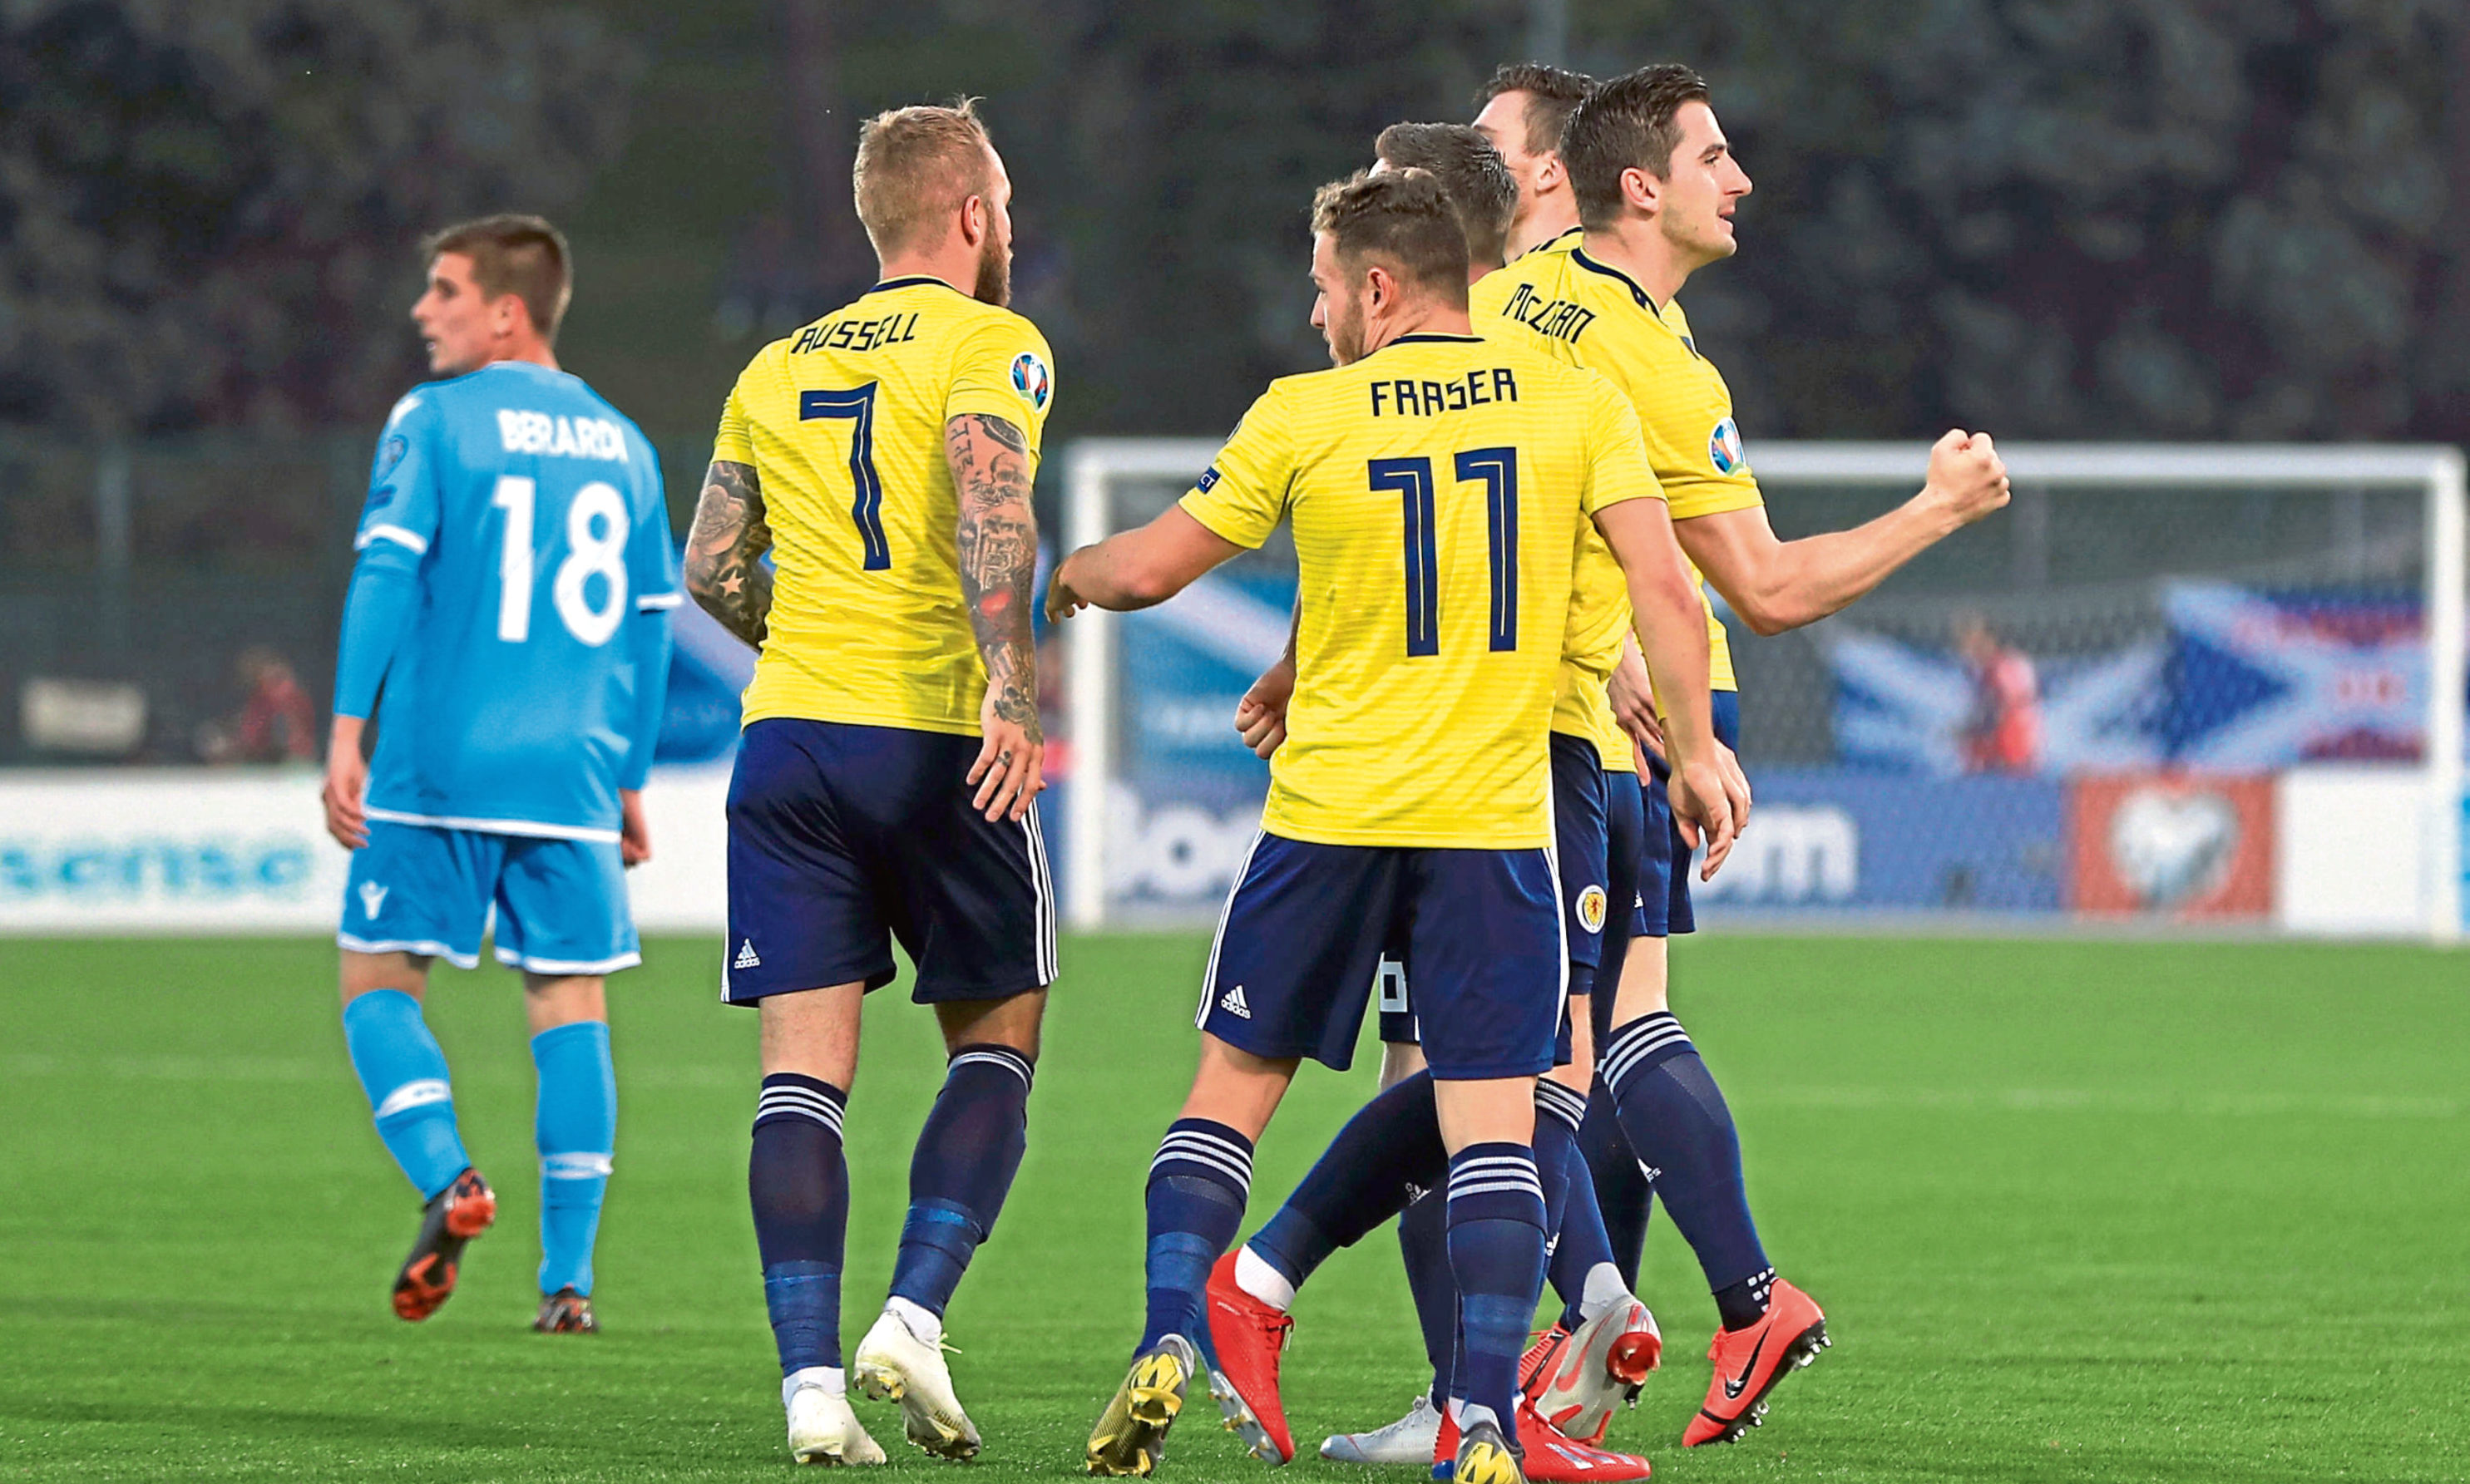 Scotland's Kenny McLean (far right) celebrates scoring his side's first goal of the game with team-mates during the UEFA Euro 2020 Qualifying, Group I match at the San Marino Stadium, Serravalle.